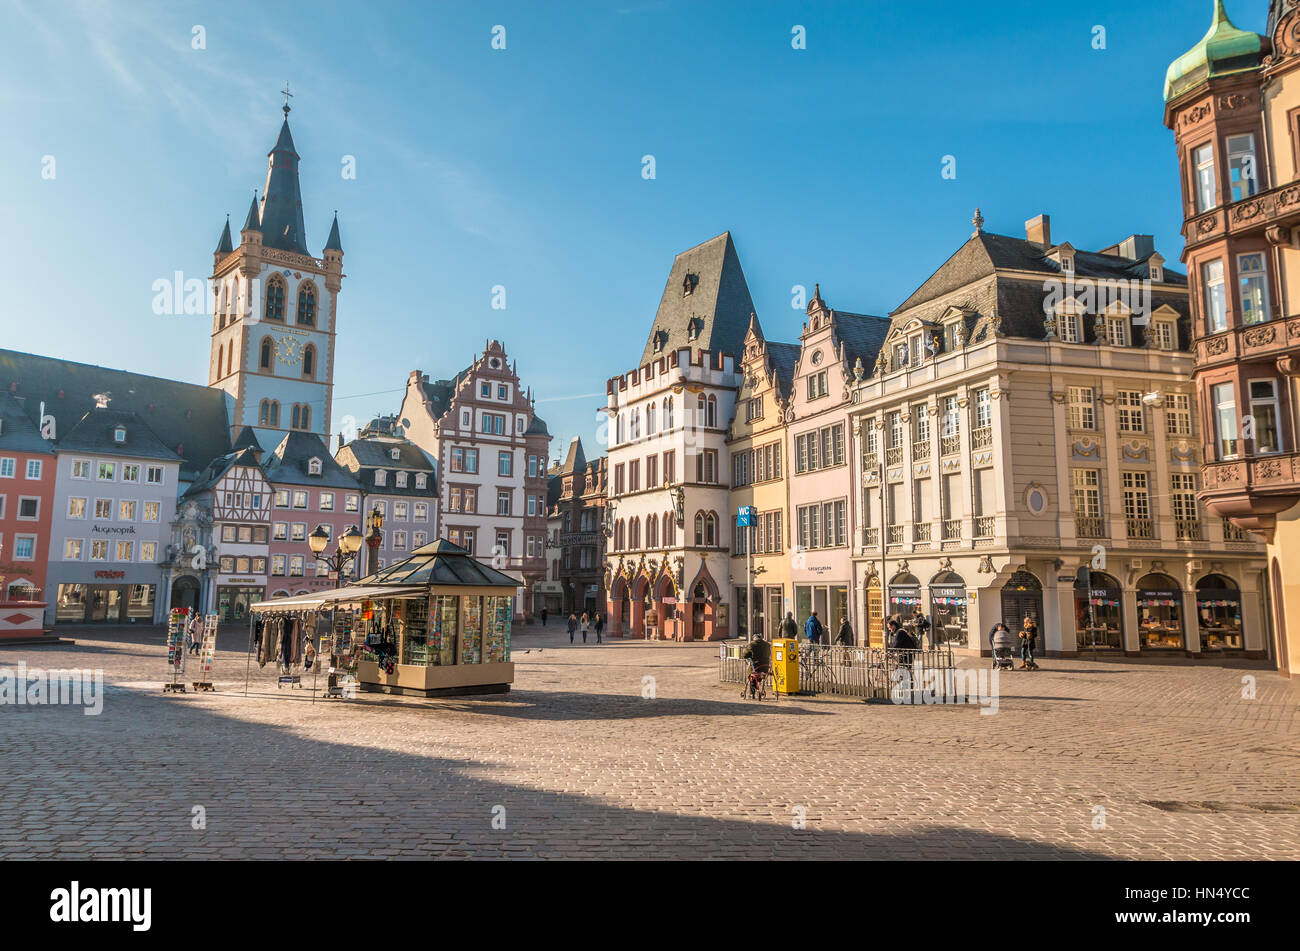 Old town Square of Trier Stock Photo